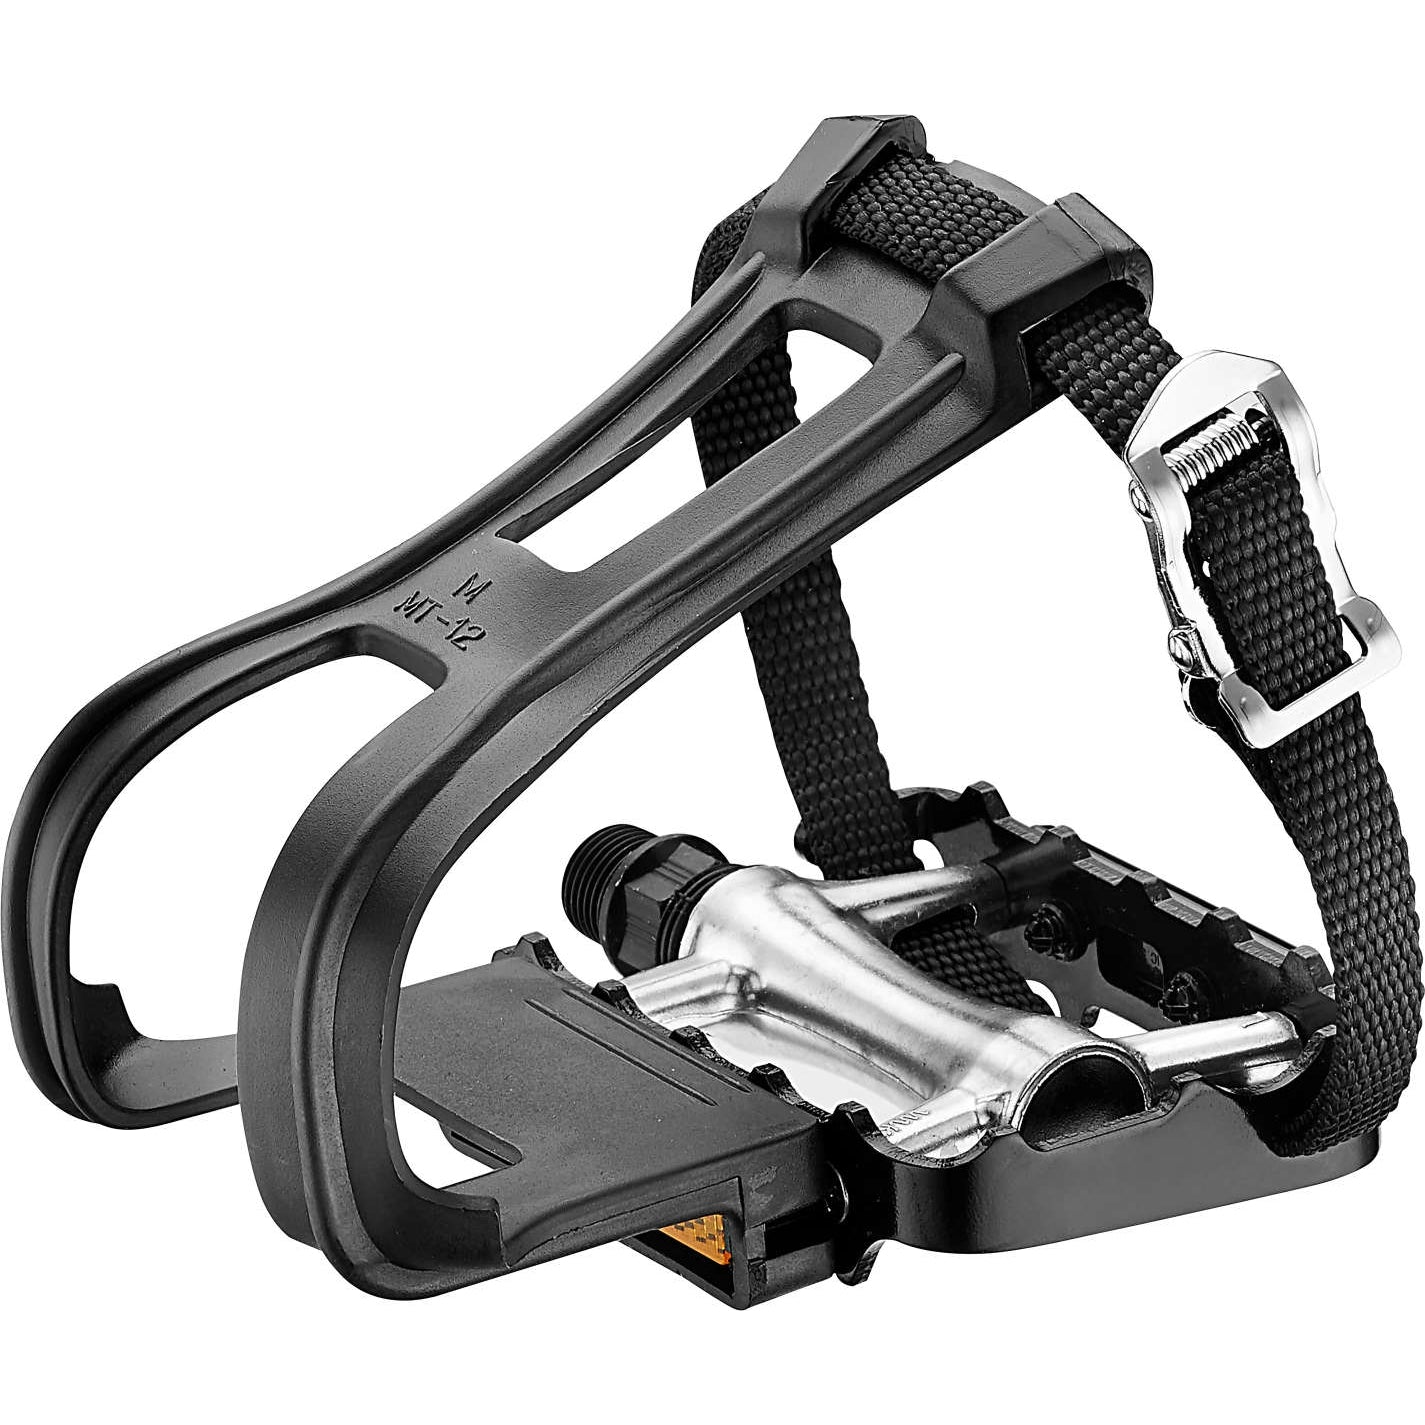 Giant Domain Bike Pedal with Toe Clips - Pedals - Bicycle Warehouse